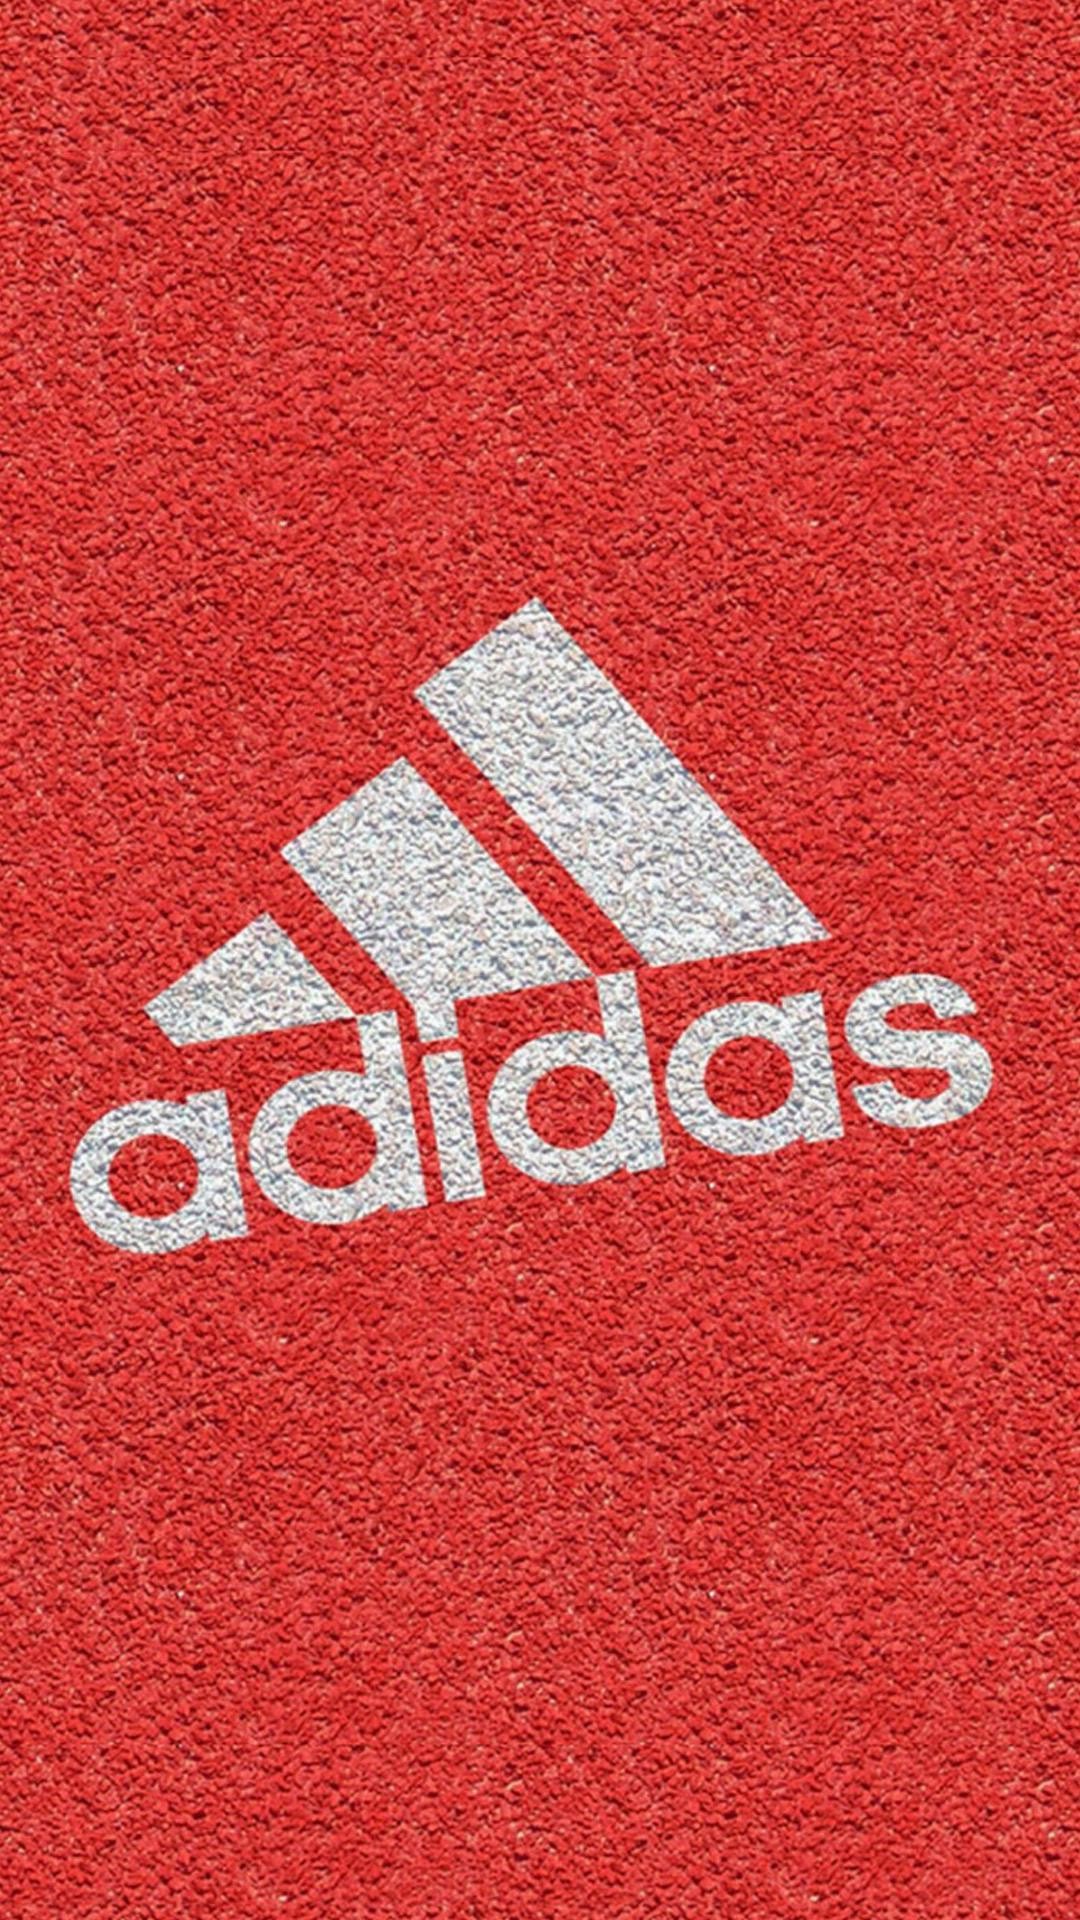 1080x1920 wallpaper.wiki-Red-Adidas-Iphone-Background-PIC-WPC0014250